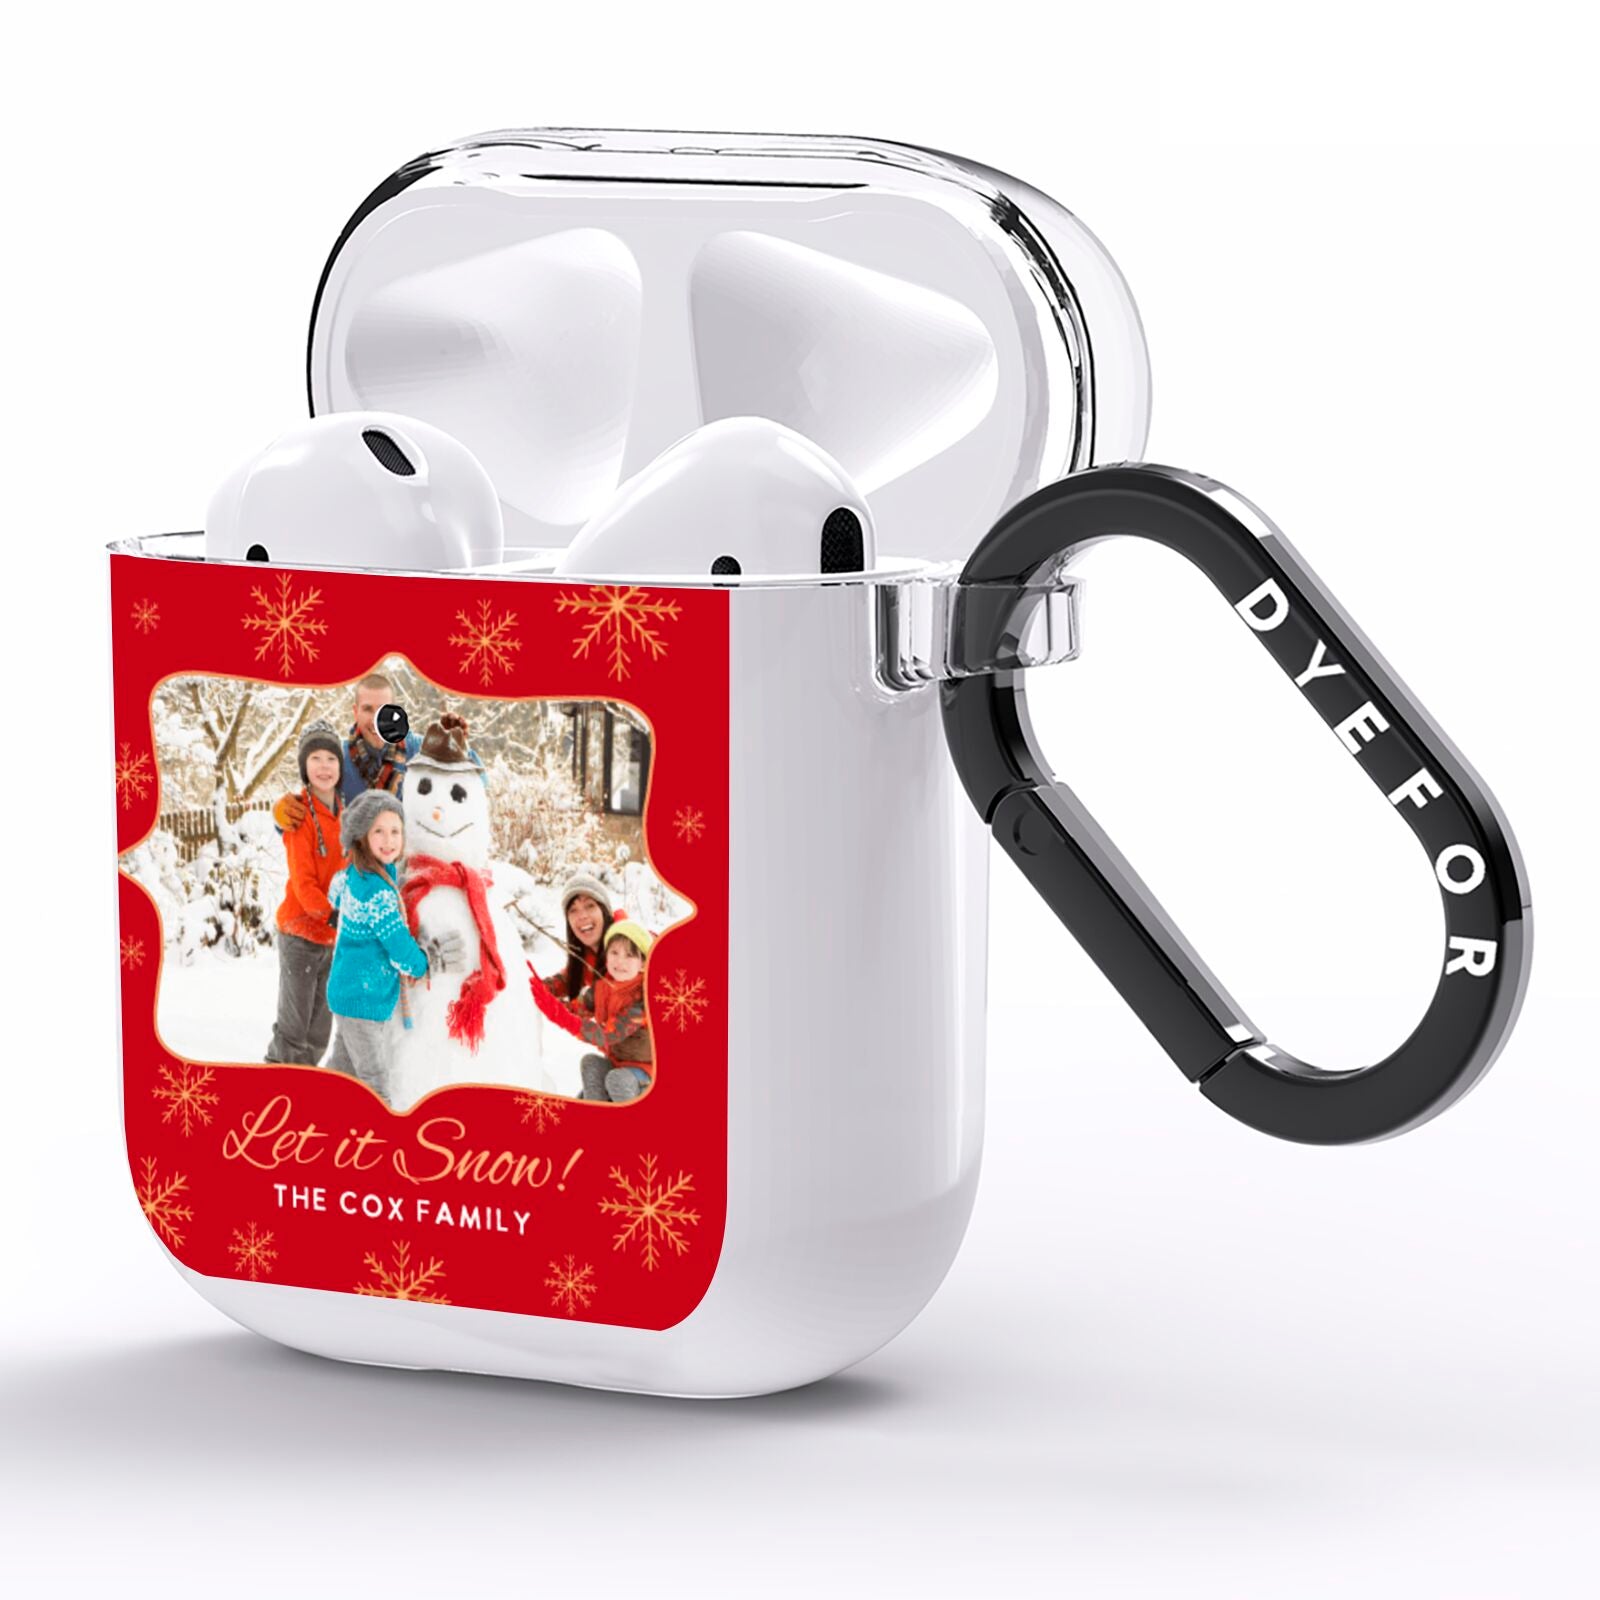 Let it Snow Christmas Photo Upload AirPods Clear Case Side Image